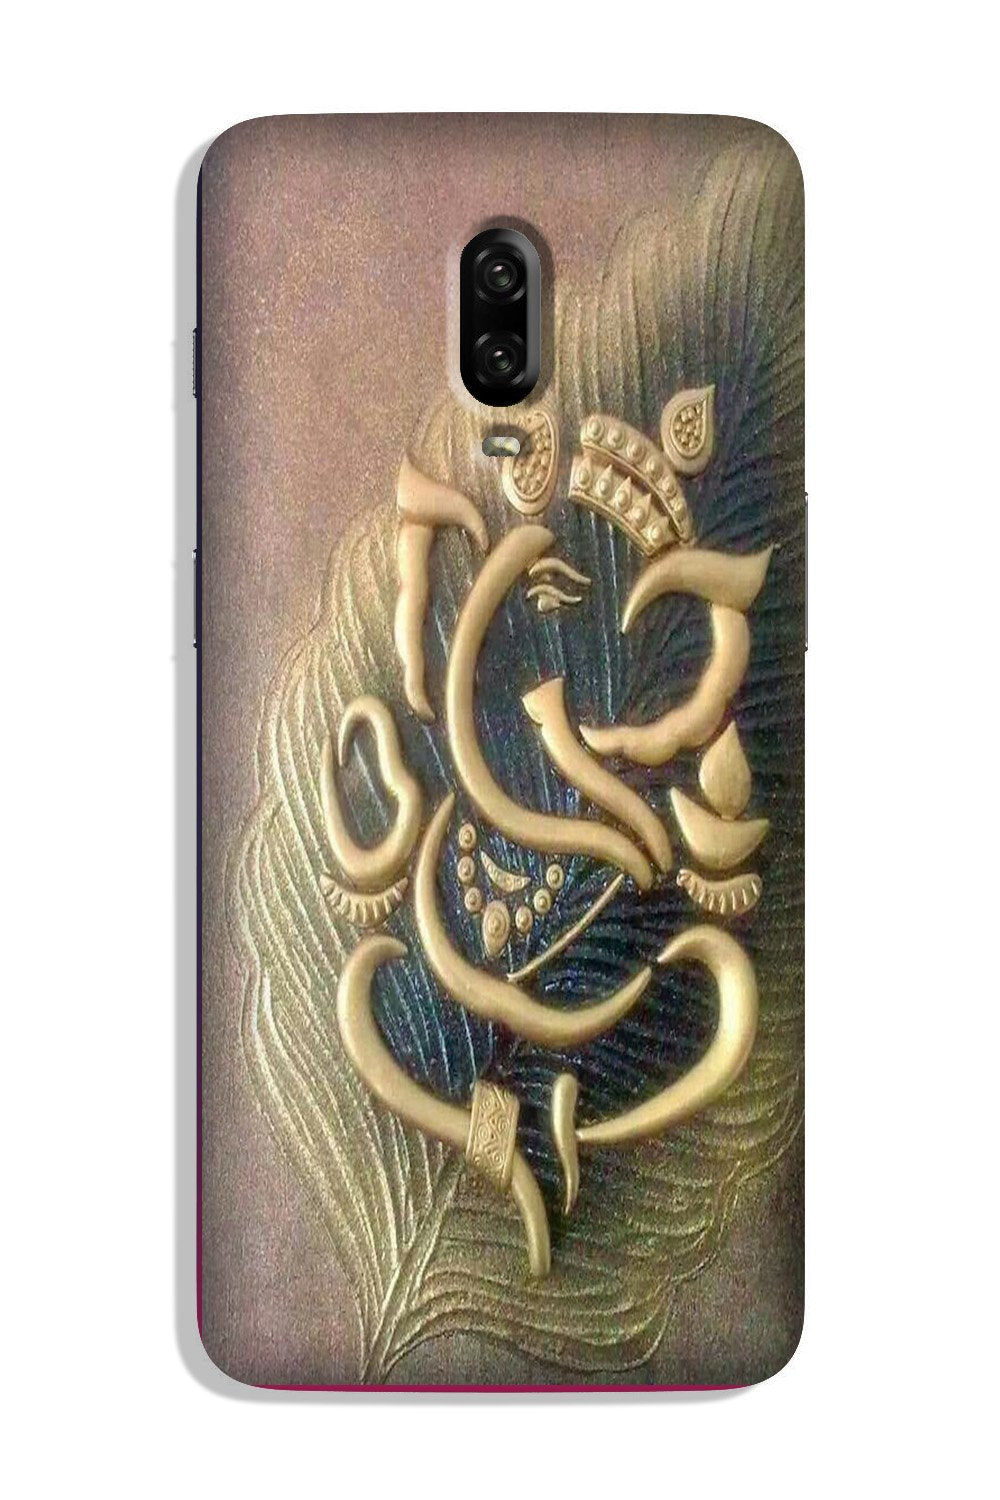 Lord Ganesha Case for OnePlus 7